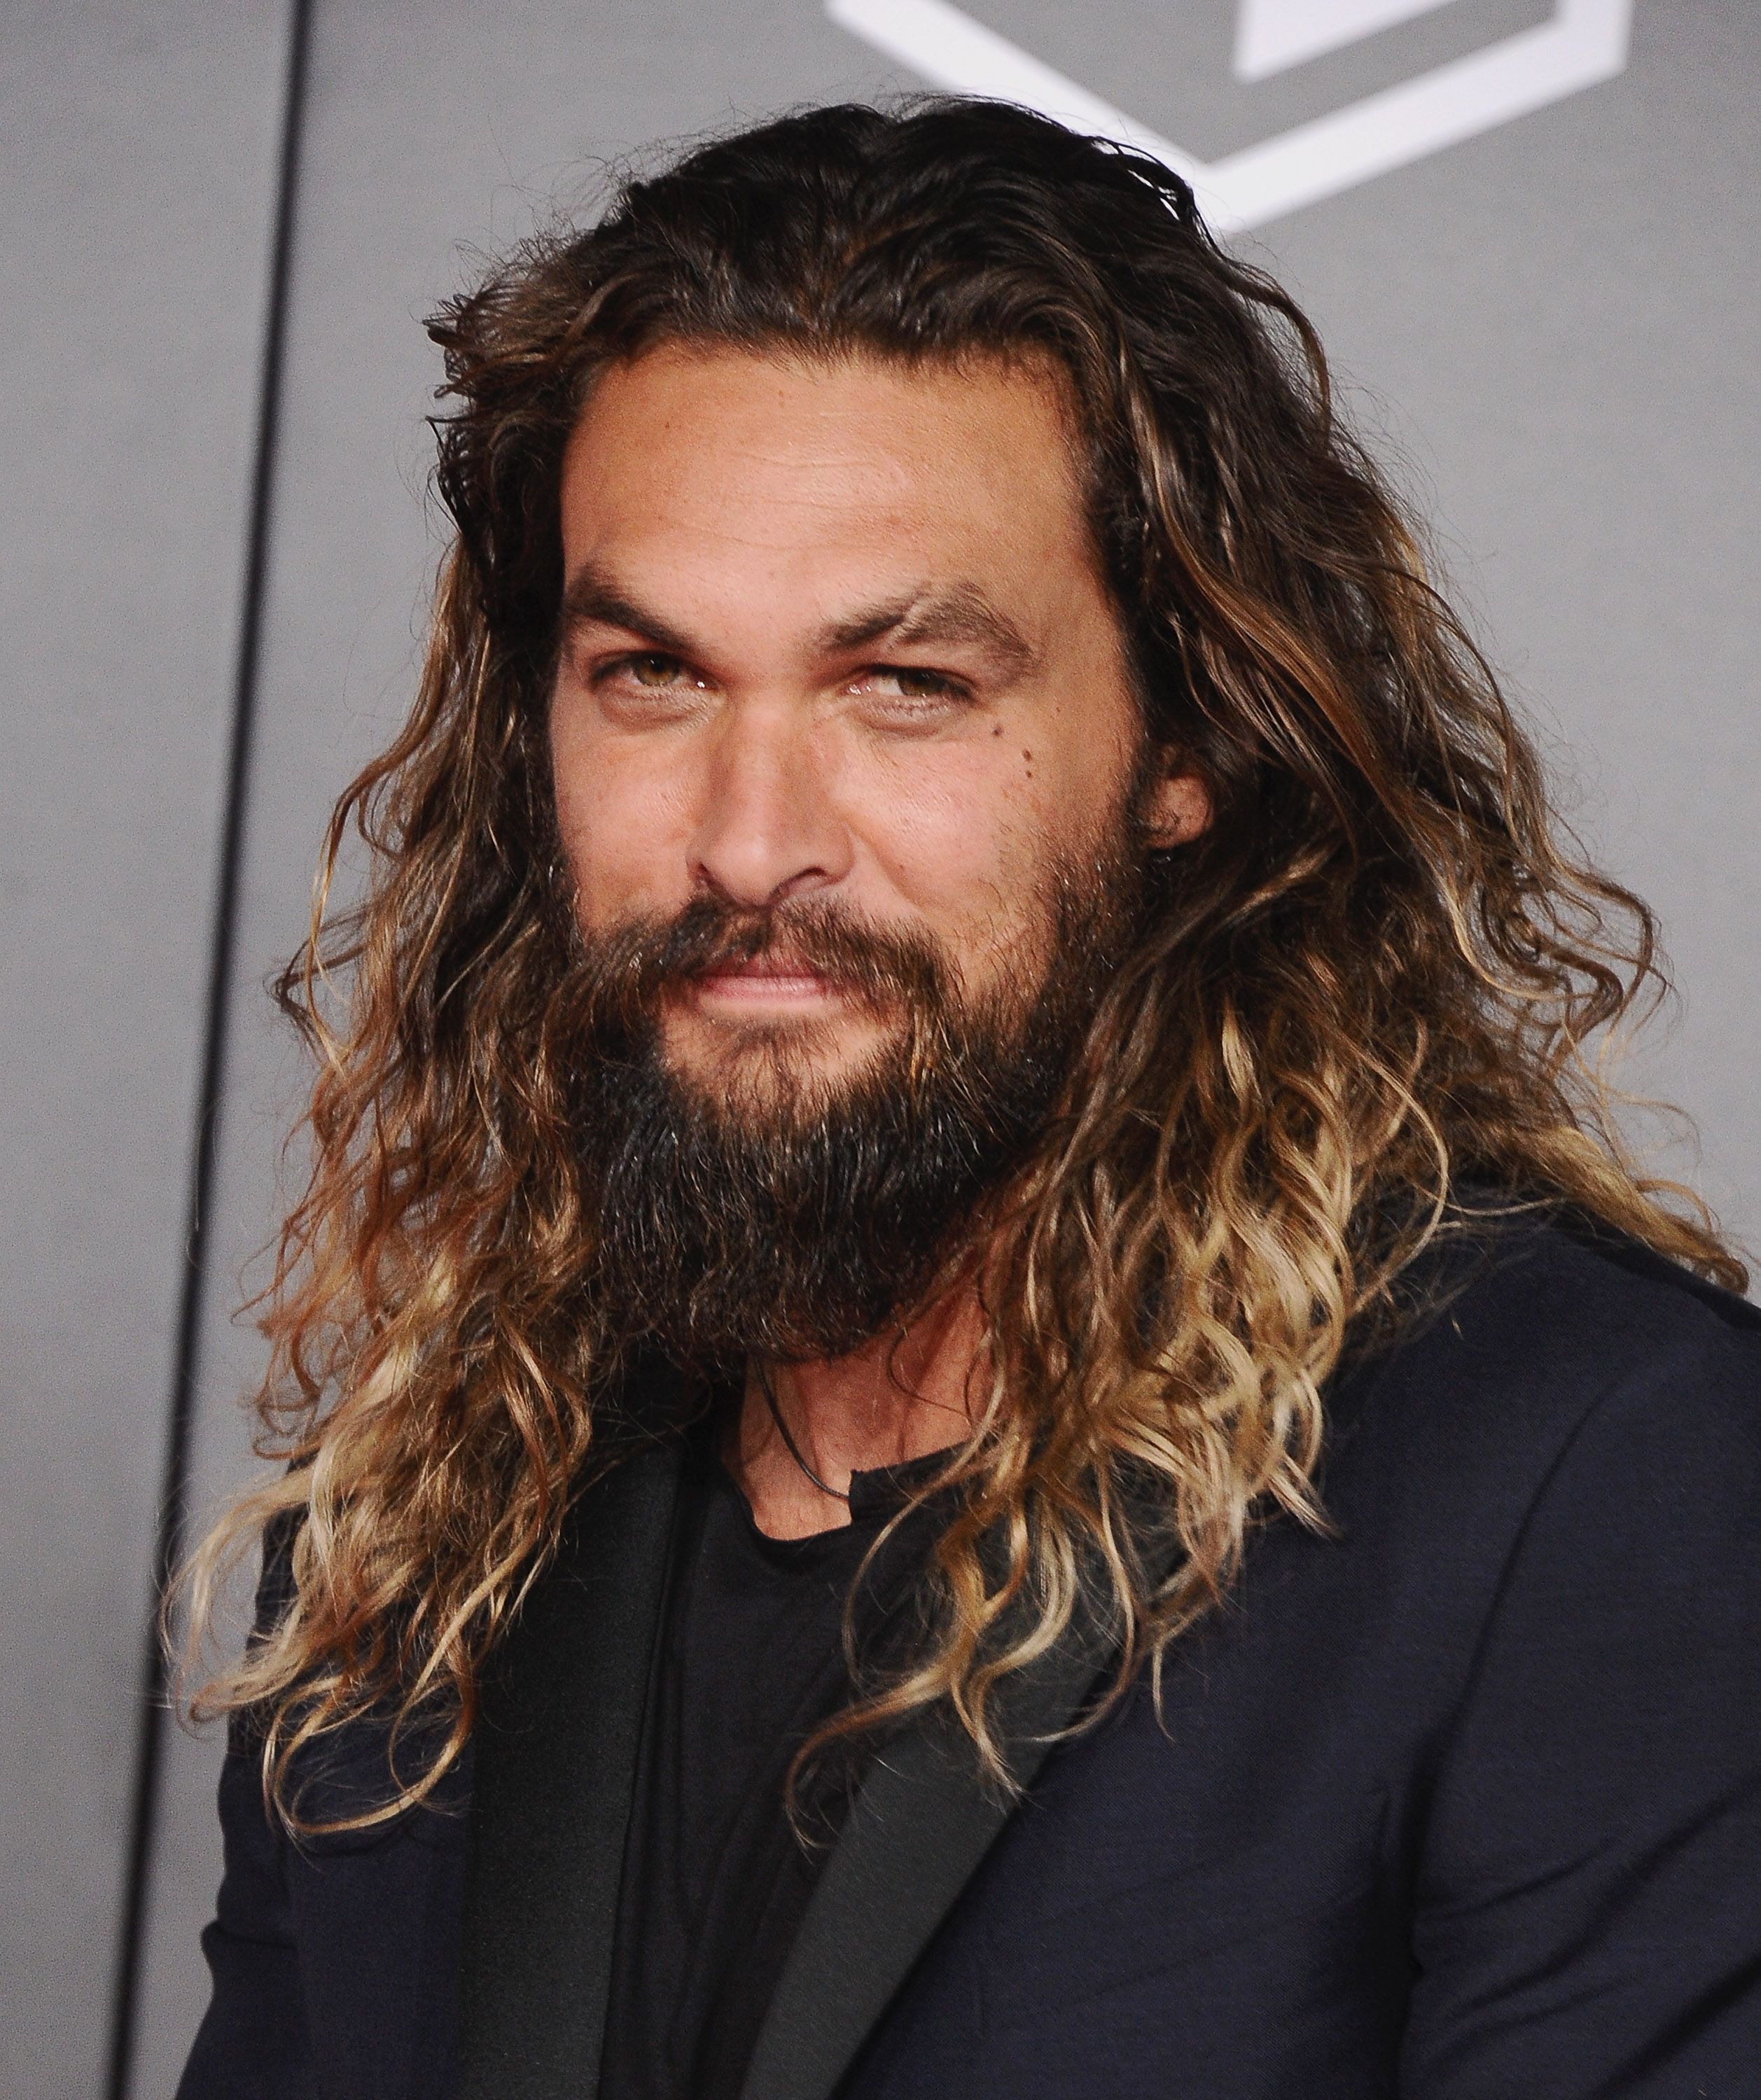 Jason Momoa during "Justice League" premiere at Dolby Theatre on November 13, 2017, in Hollywood, California. | Source: Getty Images